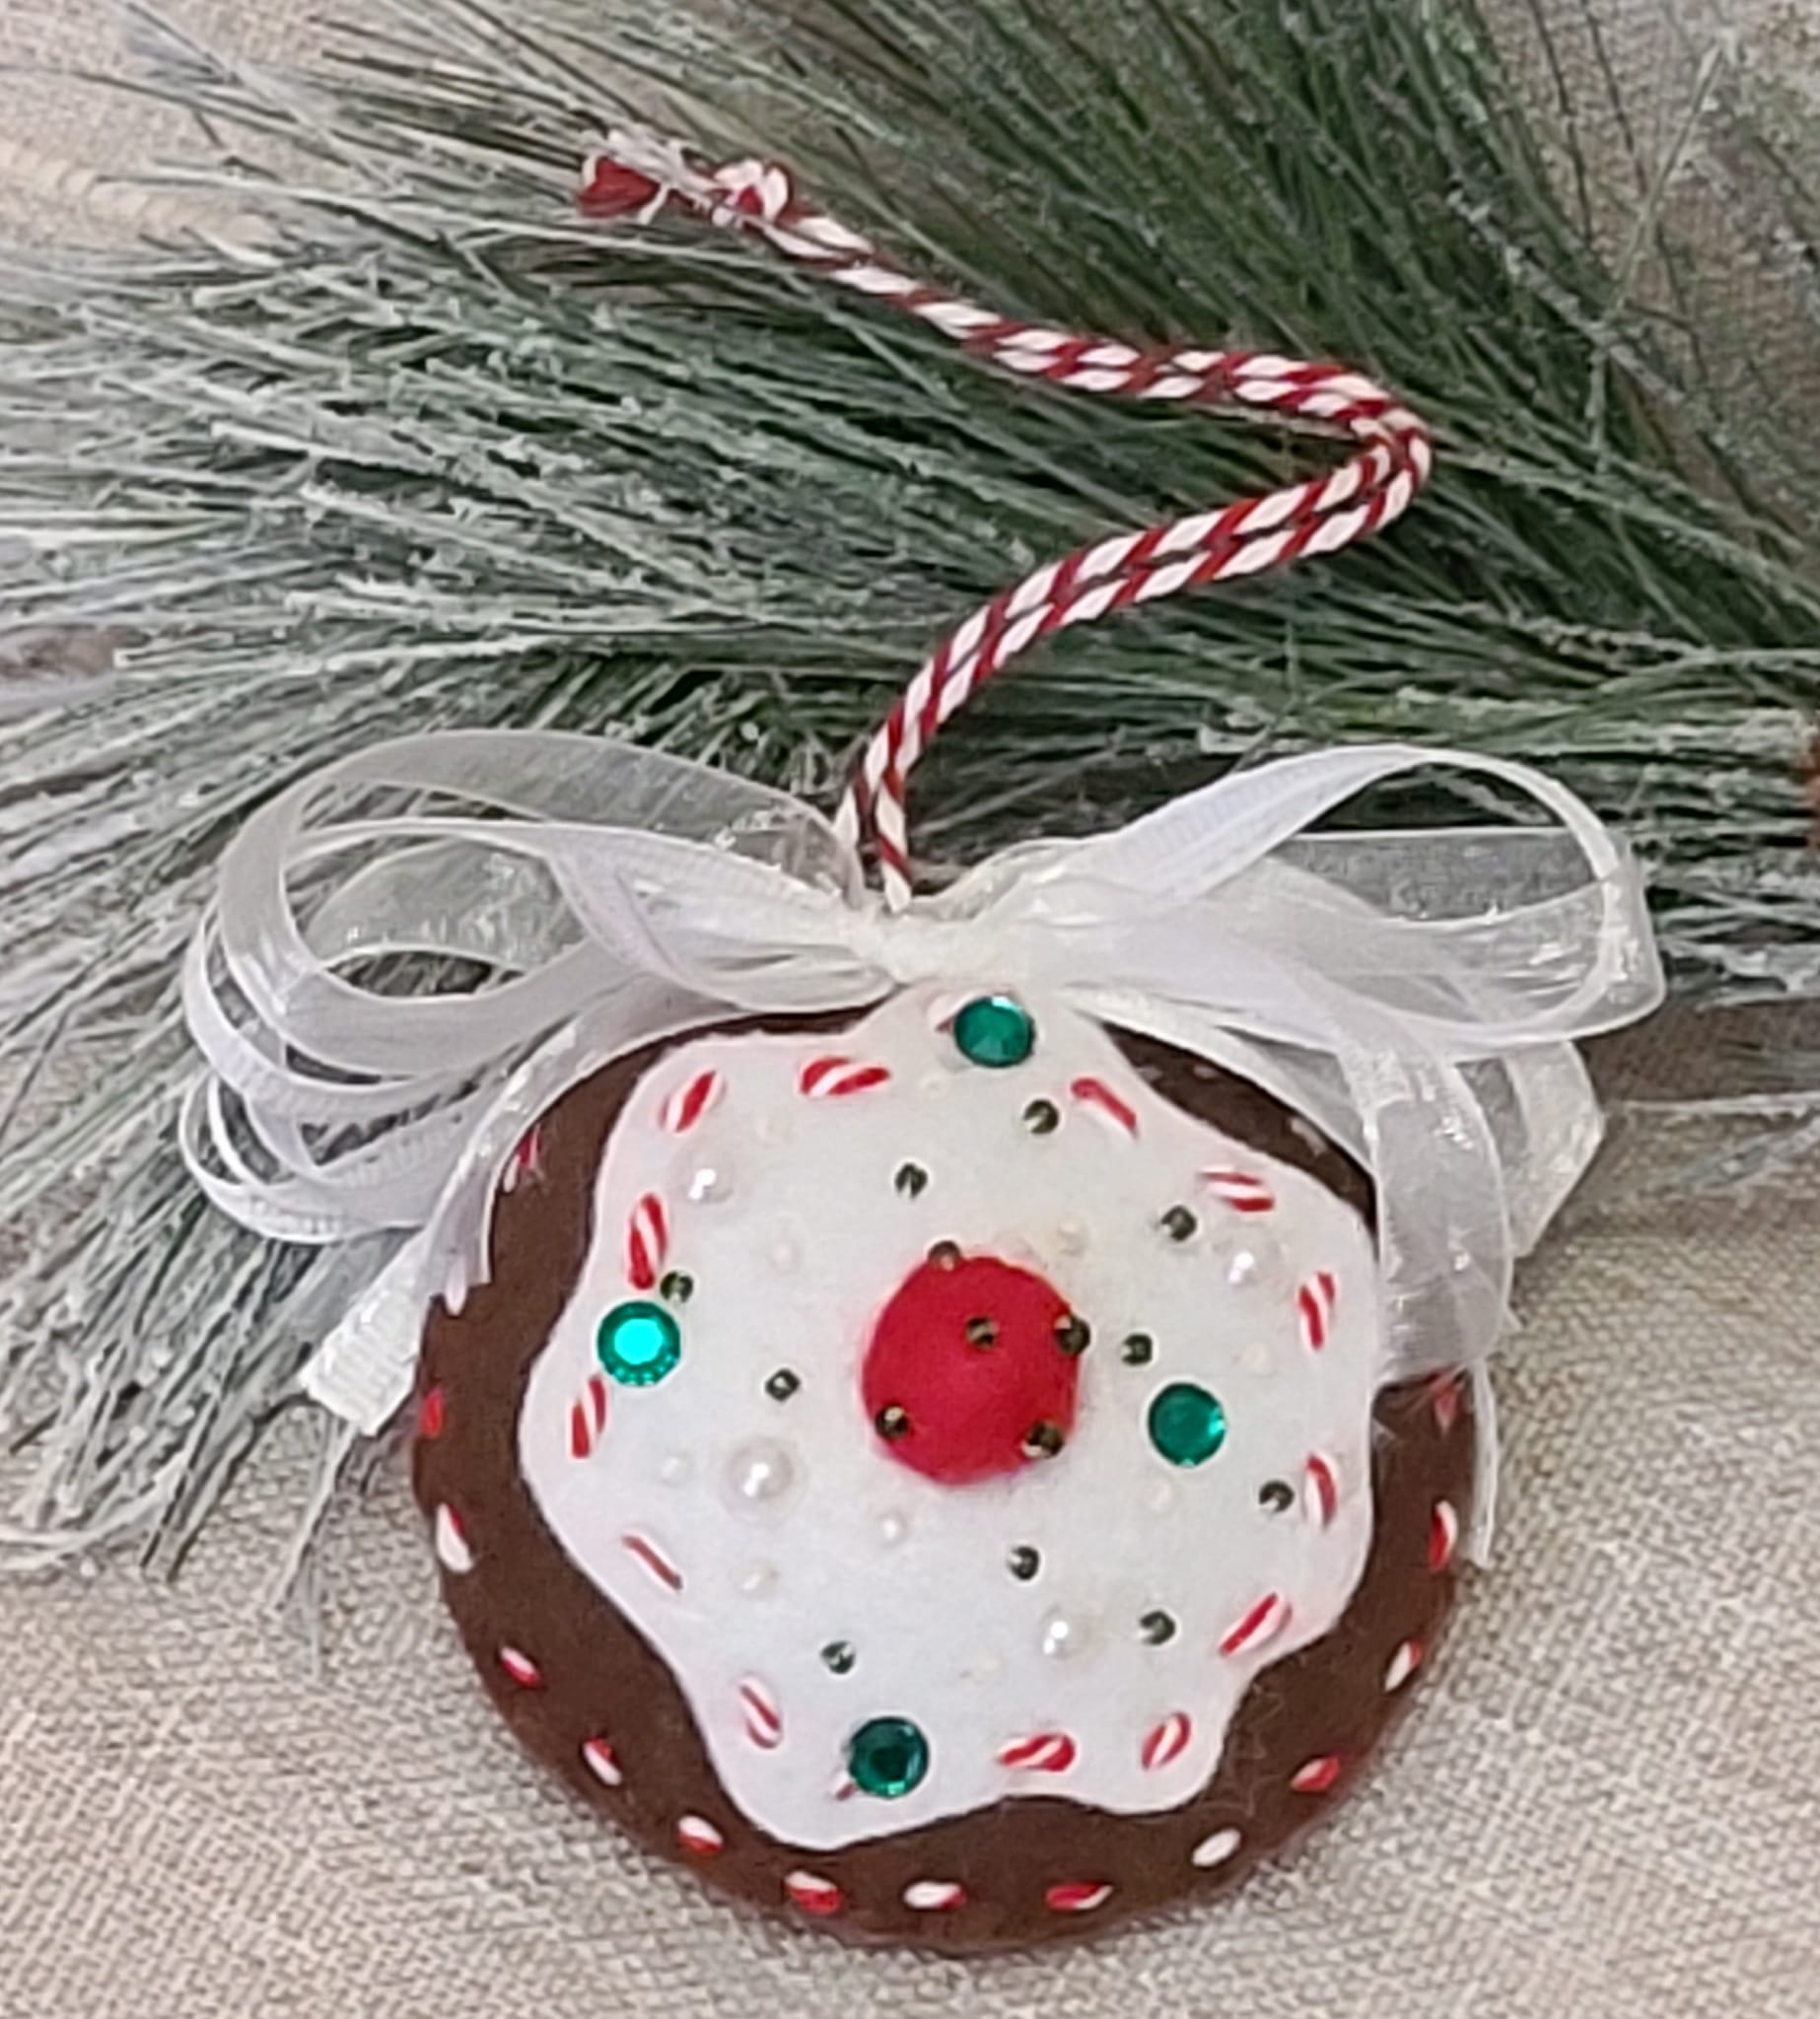 Gingerbread felt and white icing cookie ornament with cherry